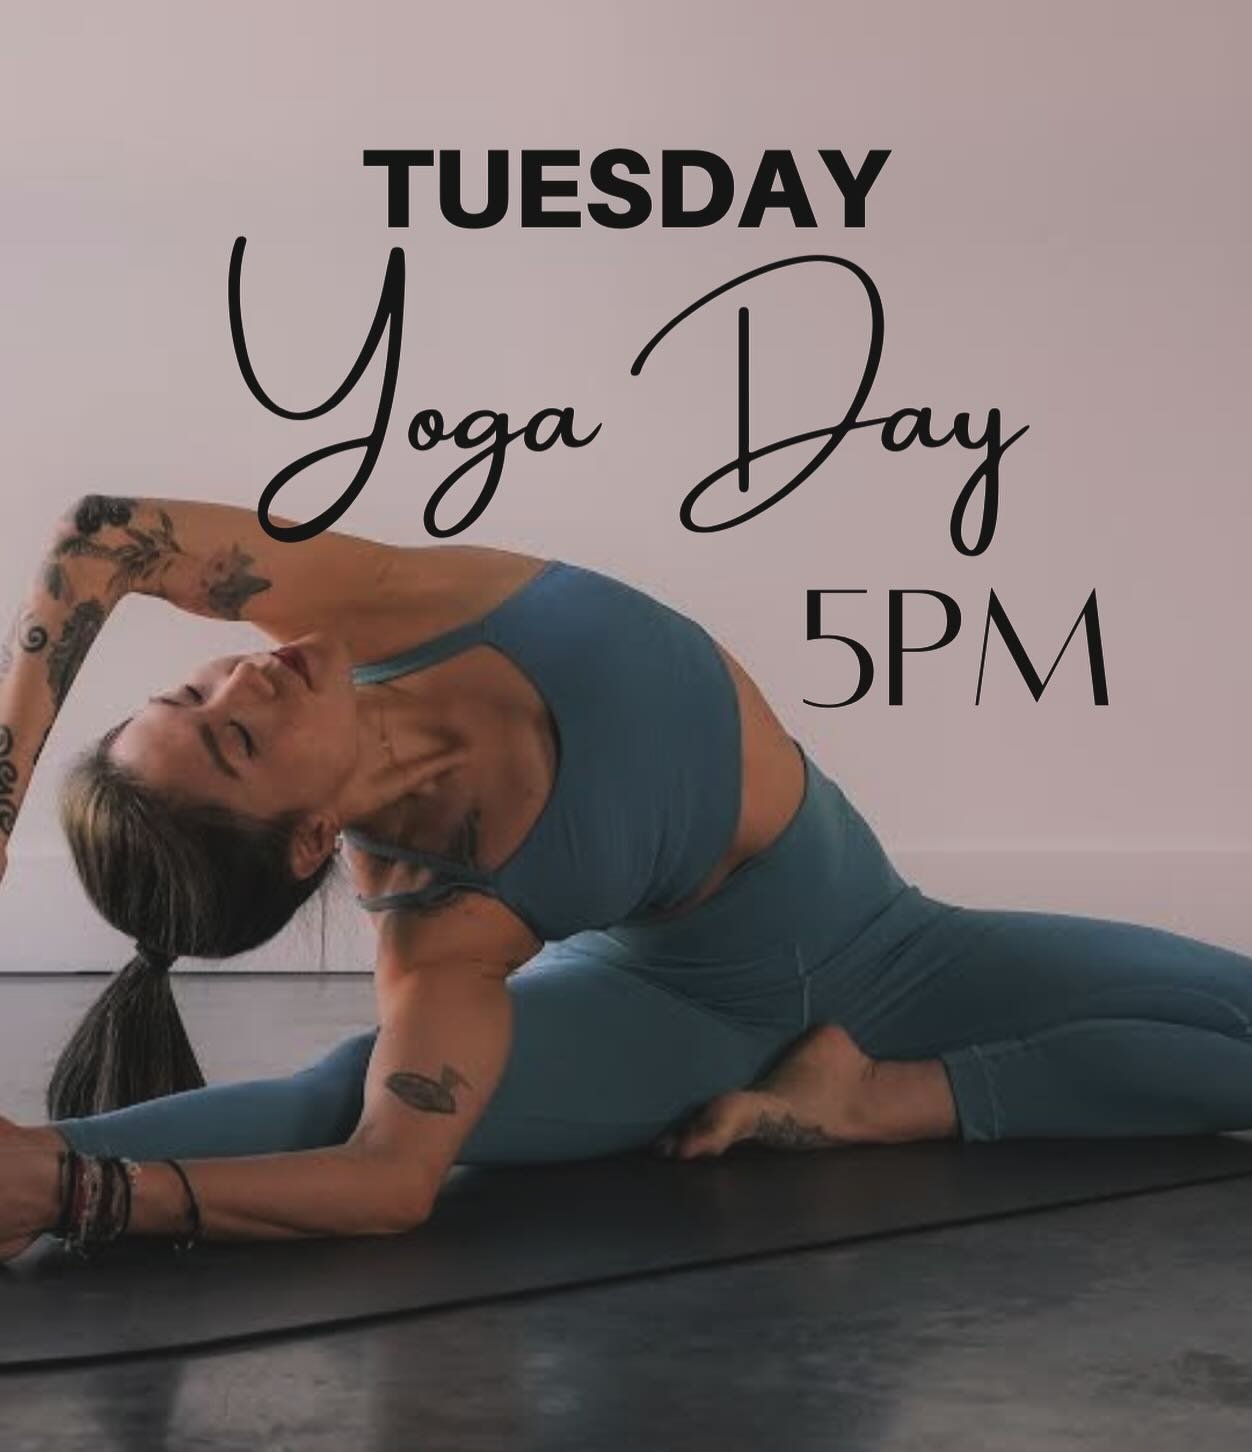 Join us TODAY April 30th at 5 PM for a special preview yoga class! Stretch, strengthen, and find balance both on and off the mat. Don&rsquo;t miss out! 🧘&zwj;♂️

Instructor @eri.catcow 
@riliongracieenergycorridor 

SEE YOU ON THE MAT! 

#yoga #dojo